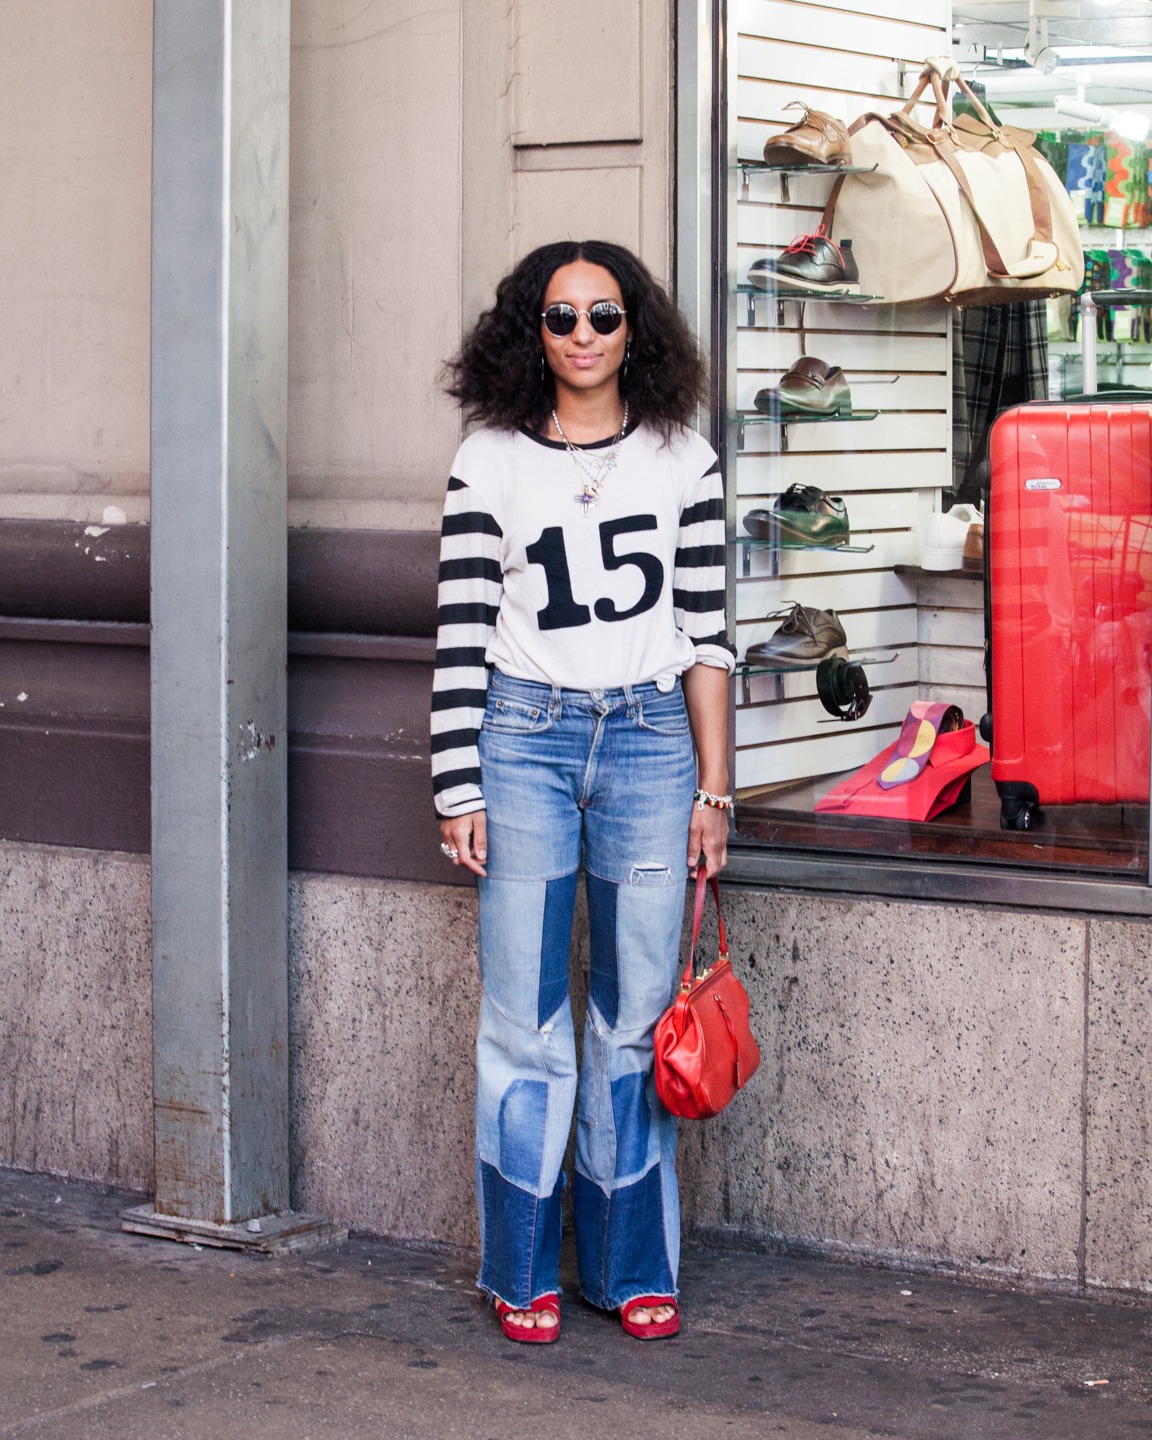 25 Low-Key Outfits That Make A Shirt And Jeans Look Avant-Garde